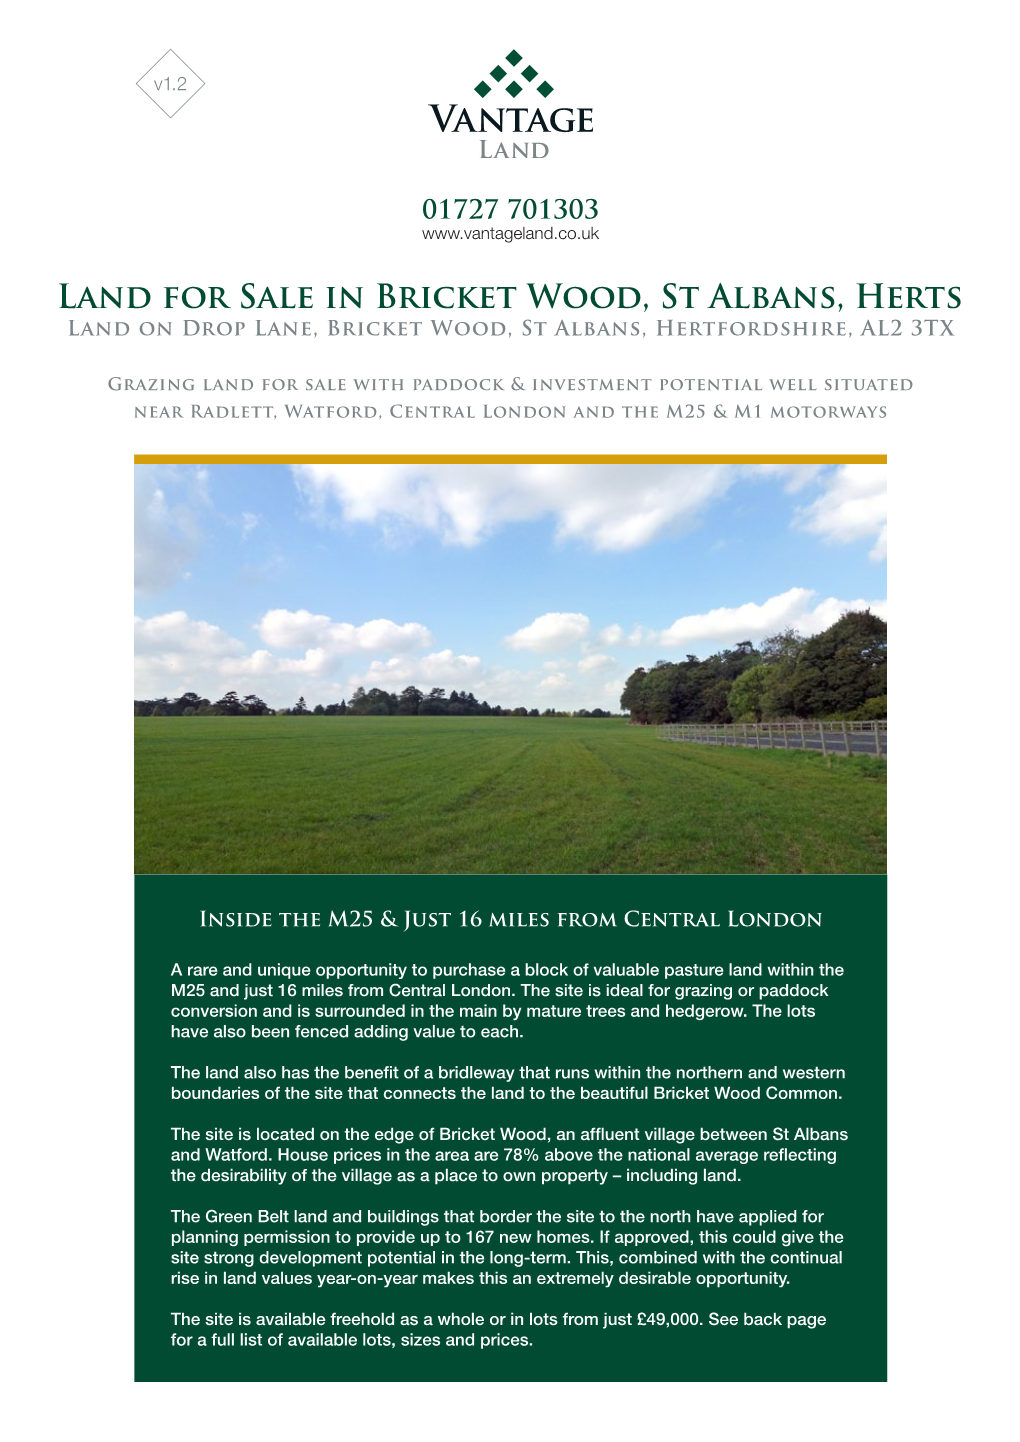 Land for Sale in Bricket Wood, St Albans, Herts Land on Drop Lane, Bricket Wood, St Albans, Hertfordshire, AL2 3TX